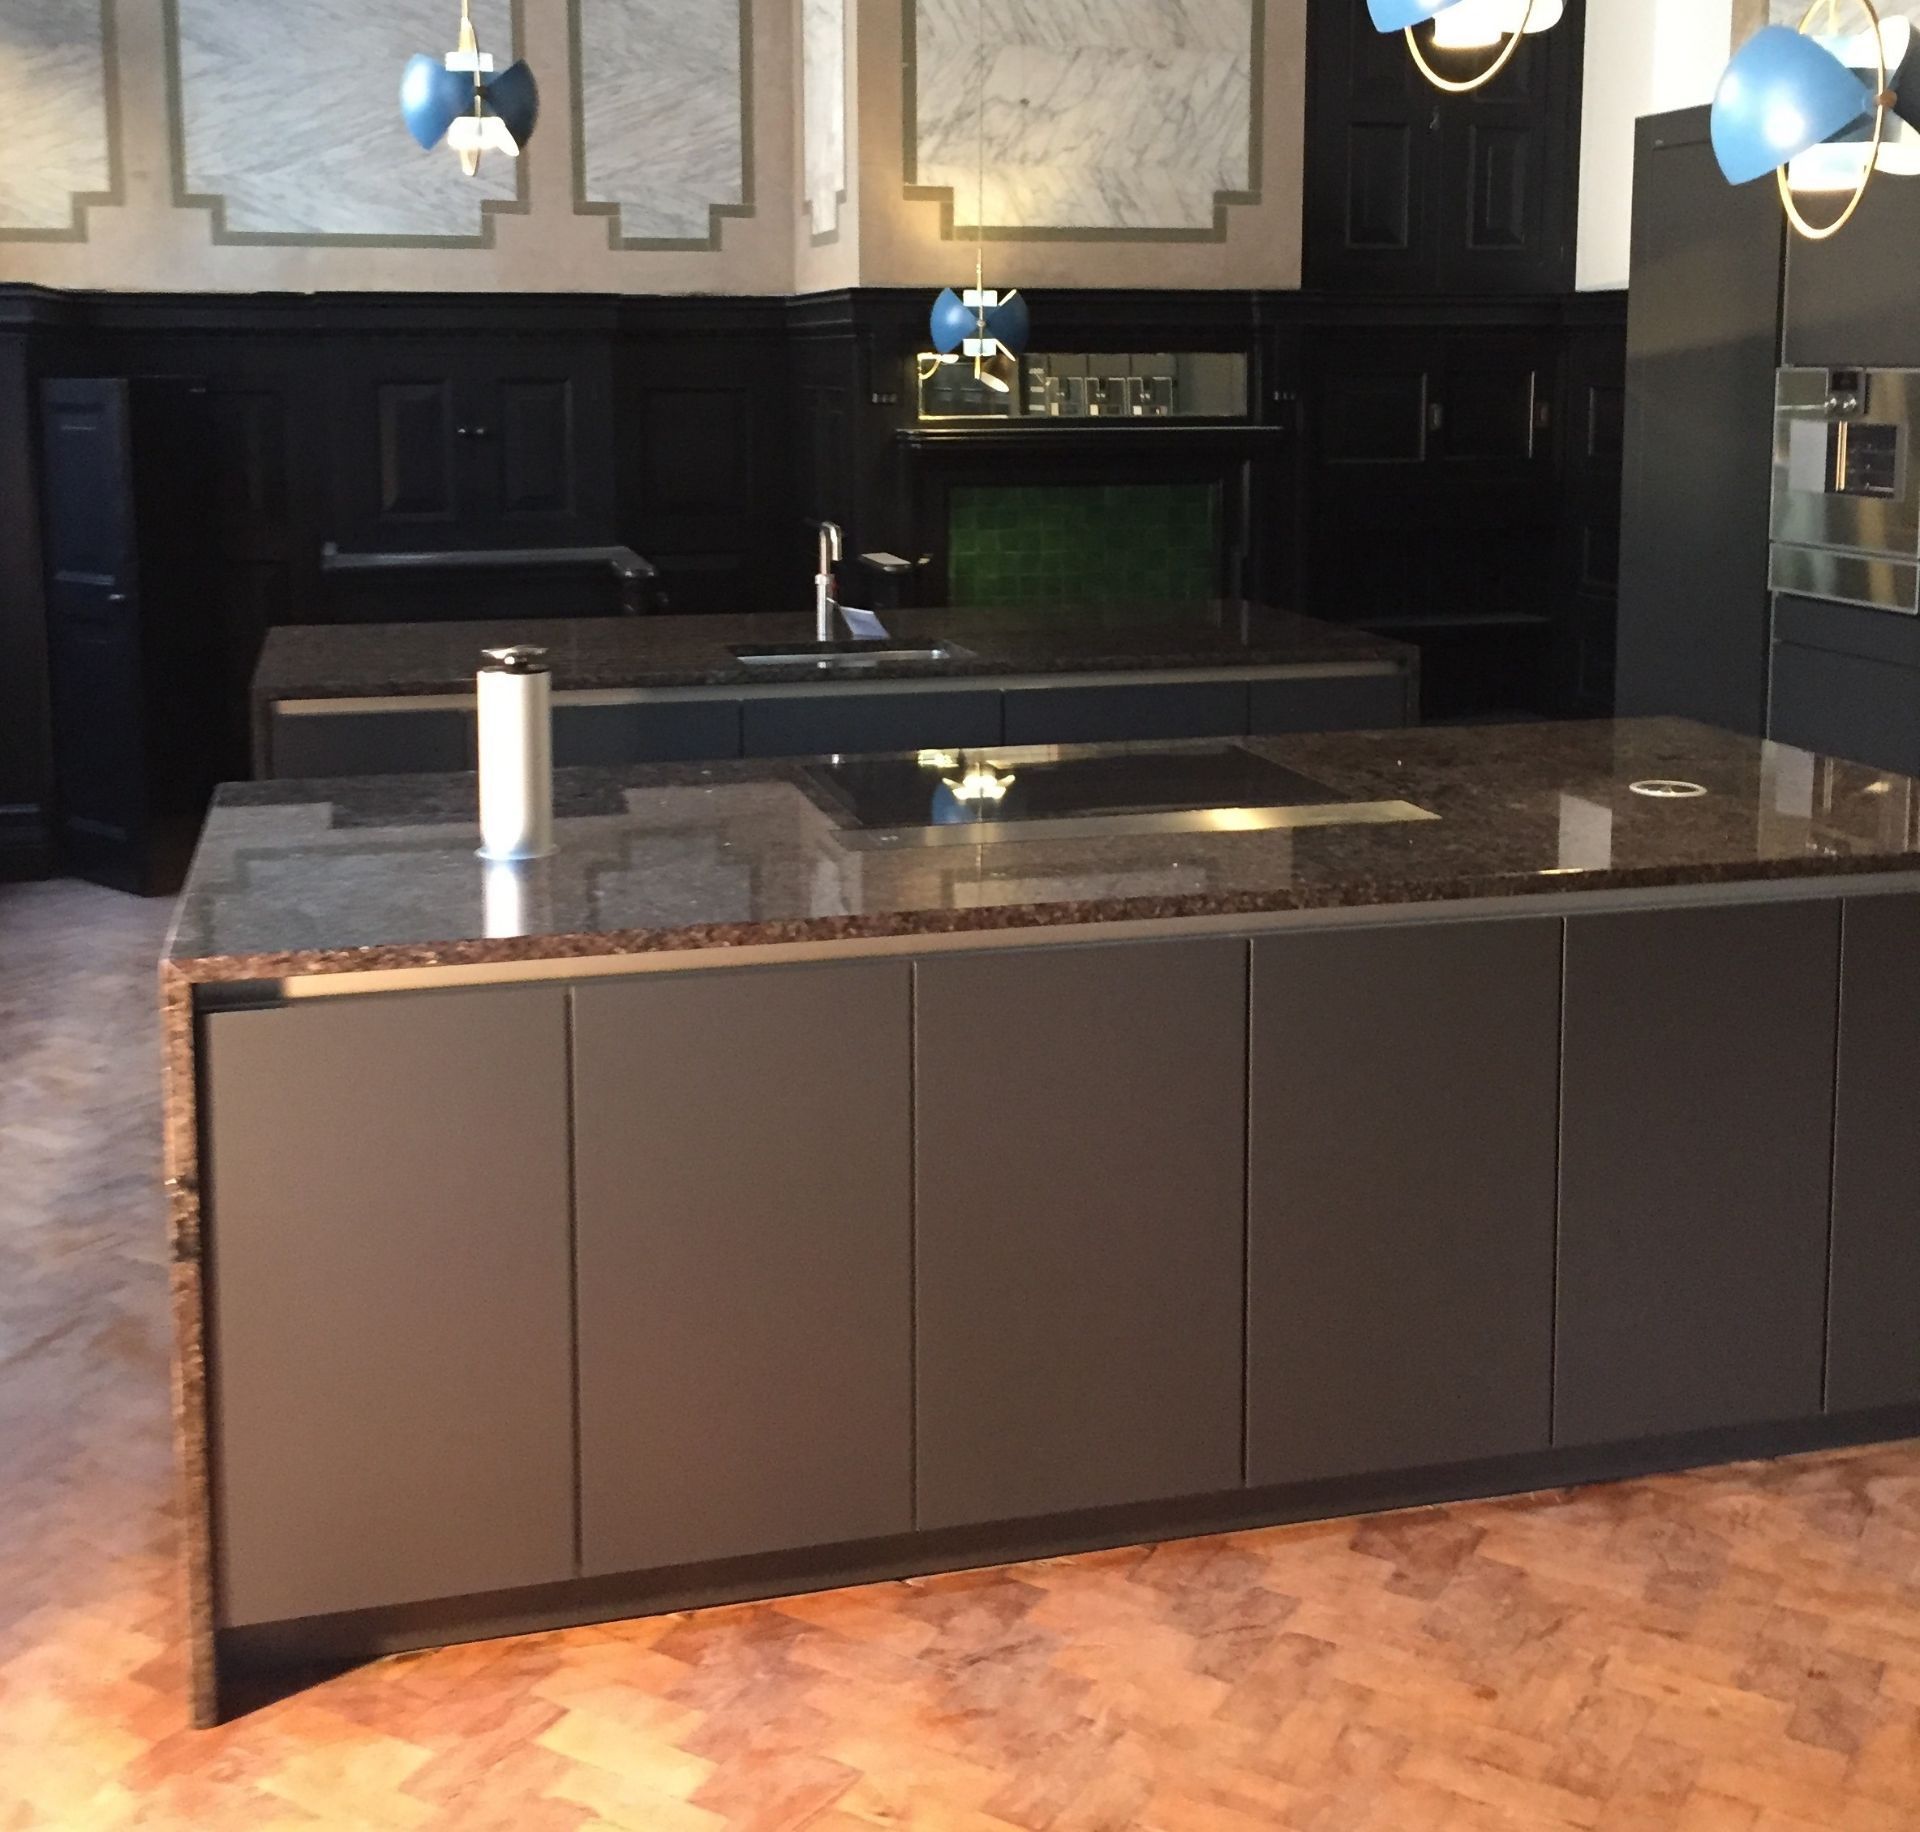 1 x SieMatic Fitted Kitchen in Basalt Grey Matt With Handleless Doors - Features Gaggenau - Image 8 of 10